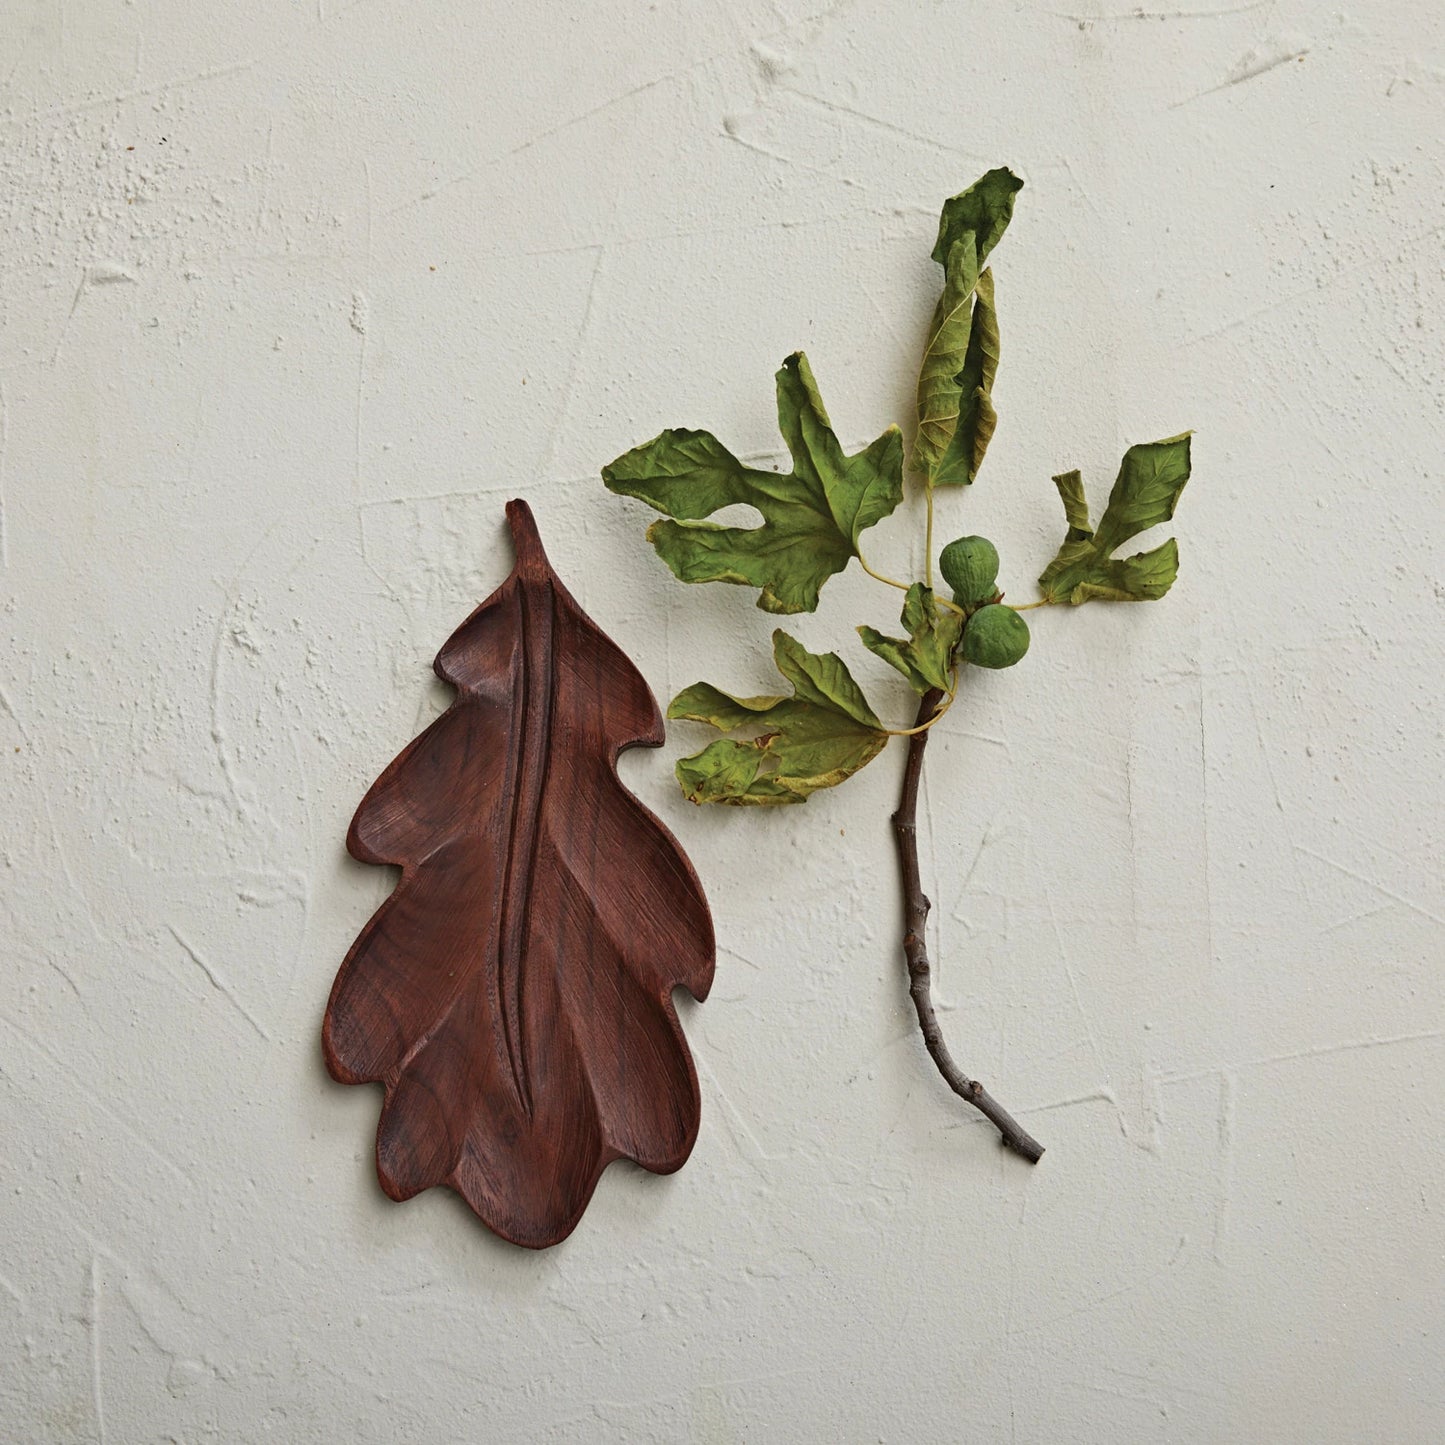 top view of wood leaf shaped board set next to a fig branch on a plaster surface.